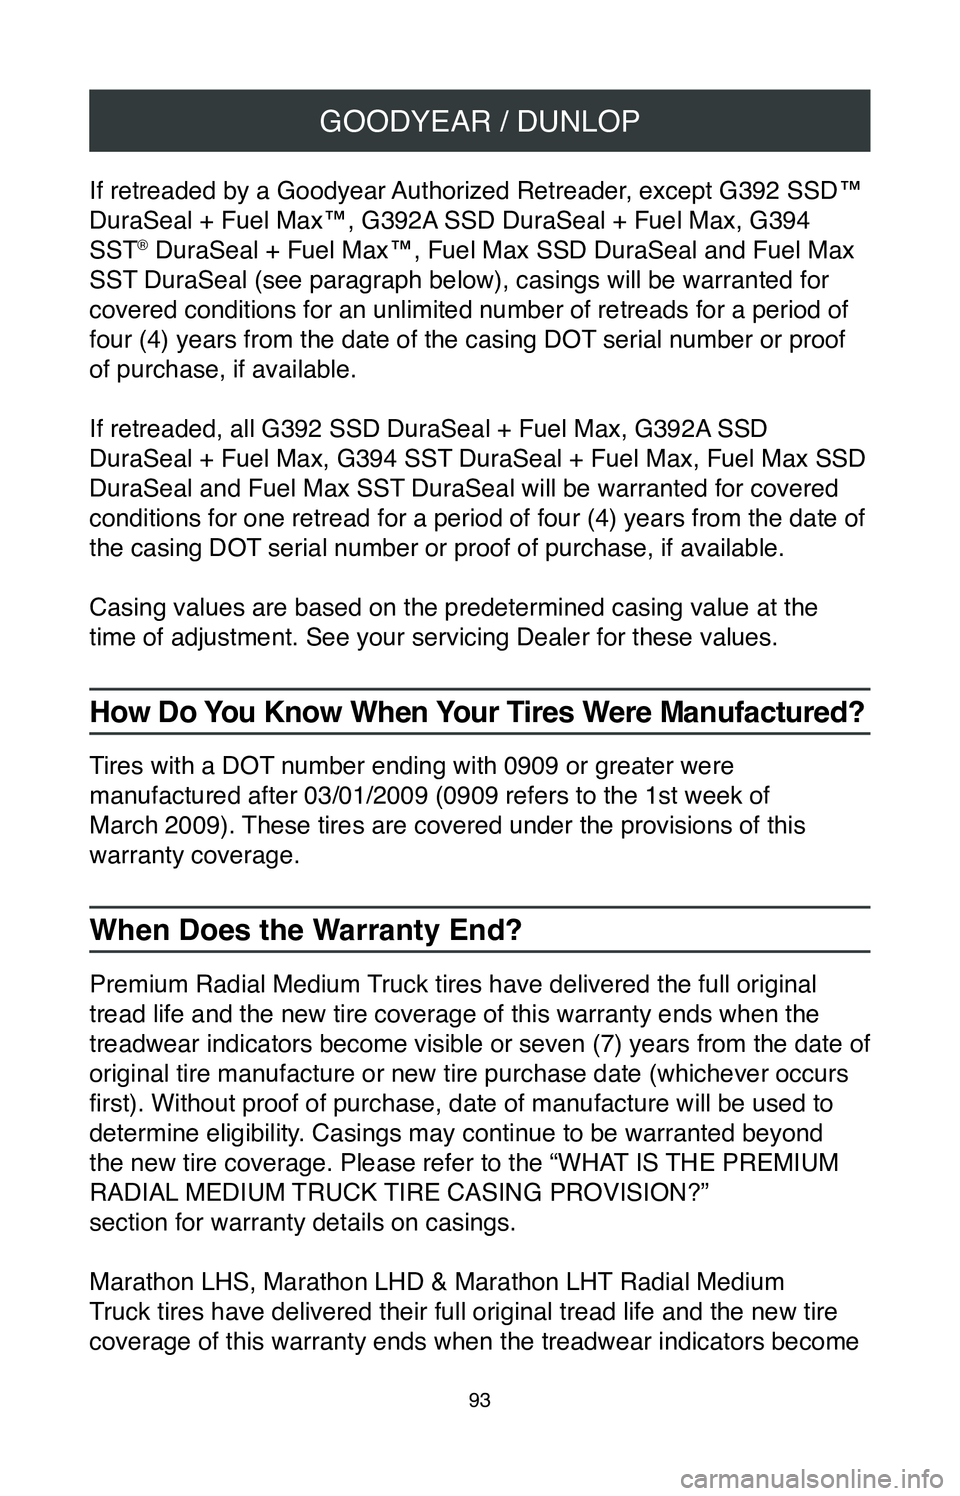 TOYOTA MIRAI 2020  Warranties & Maintenance Guides (in English) GOODYEAR / DUNLOP
93
If retreaded by a Goodyear Authorized Retreader, except G392 SSD™ 
DuraSeal + Fuel Max™, G392A SSD DuraSeal + Fuel Max, G394 
SST
® DuraSeal + Fuel Max™, Fuel Max SSD DuraS